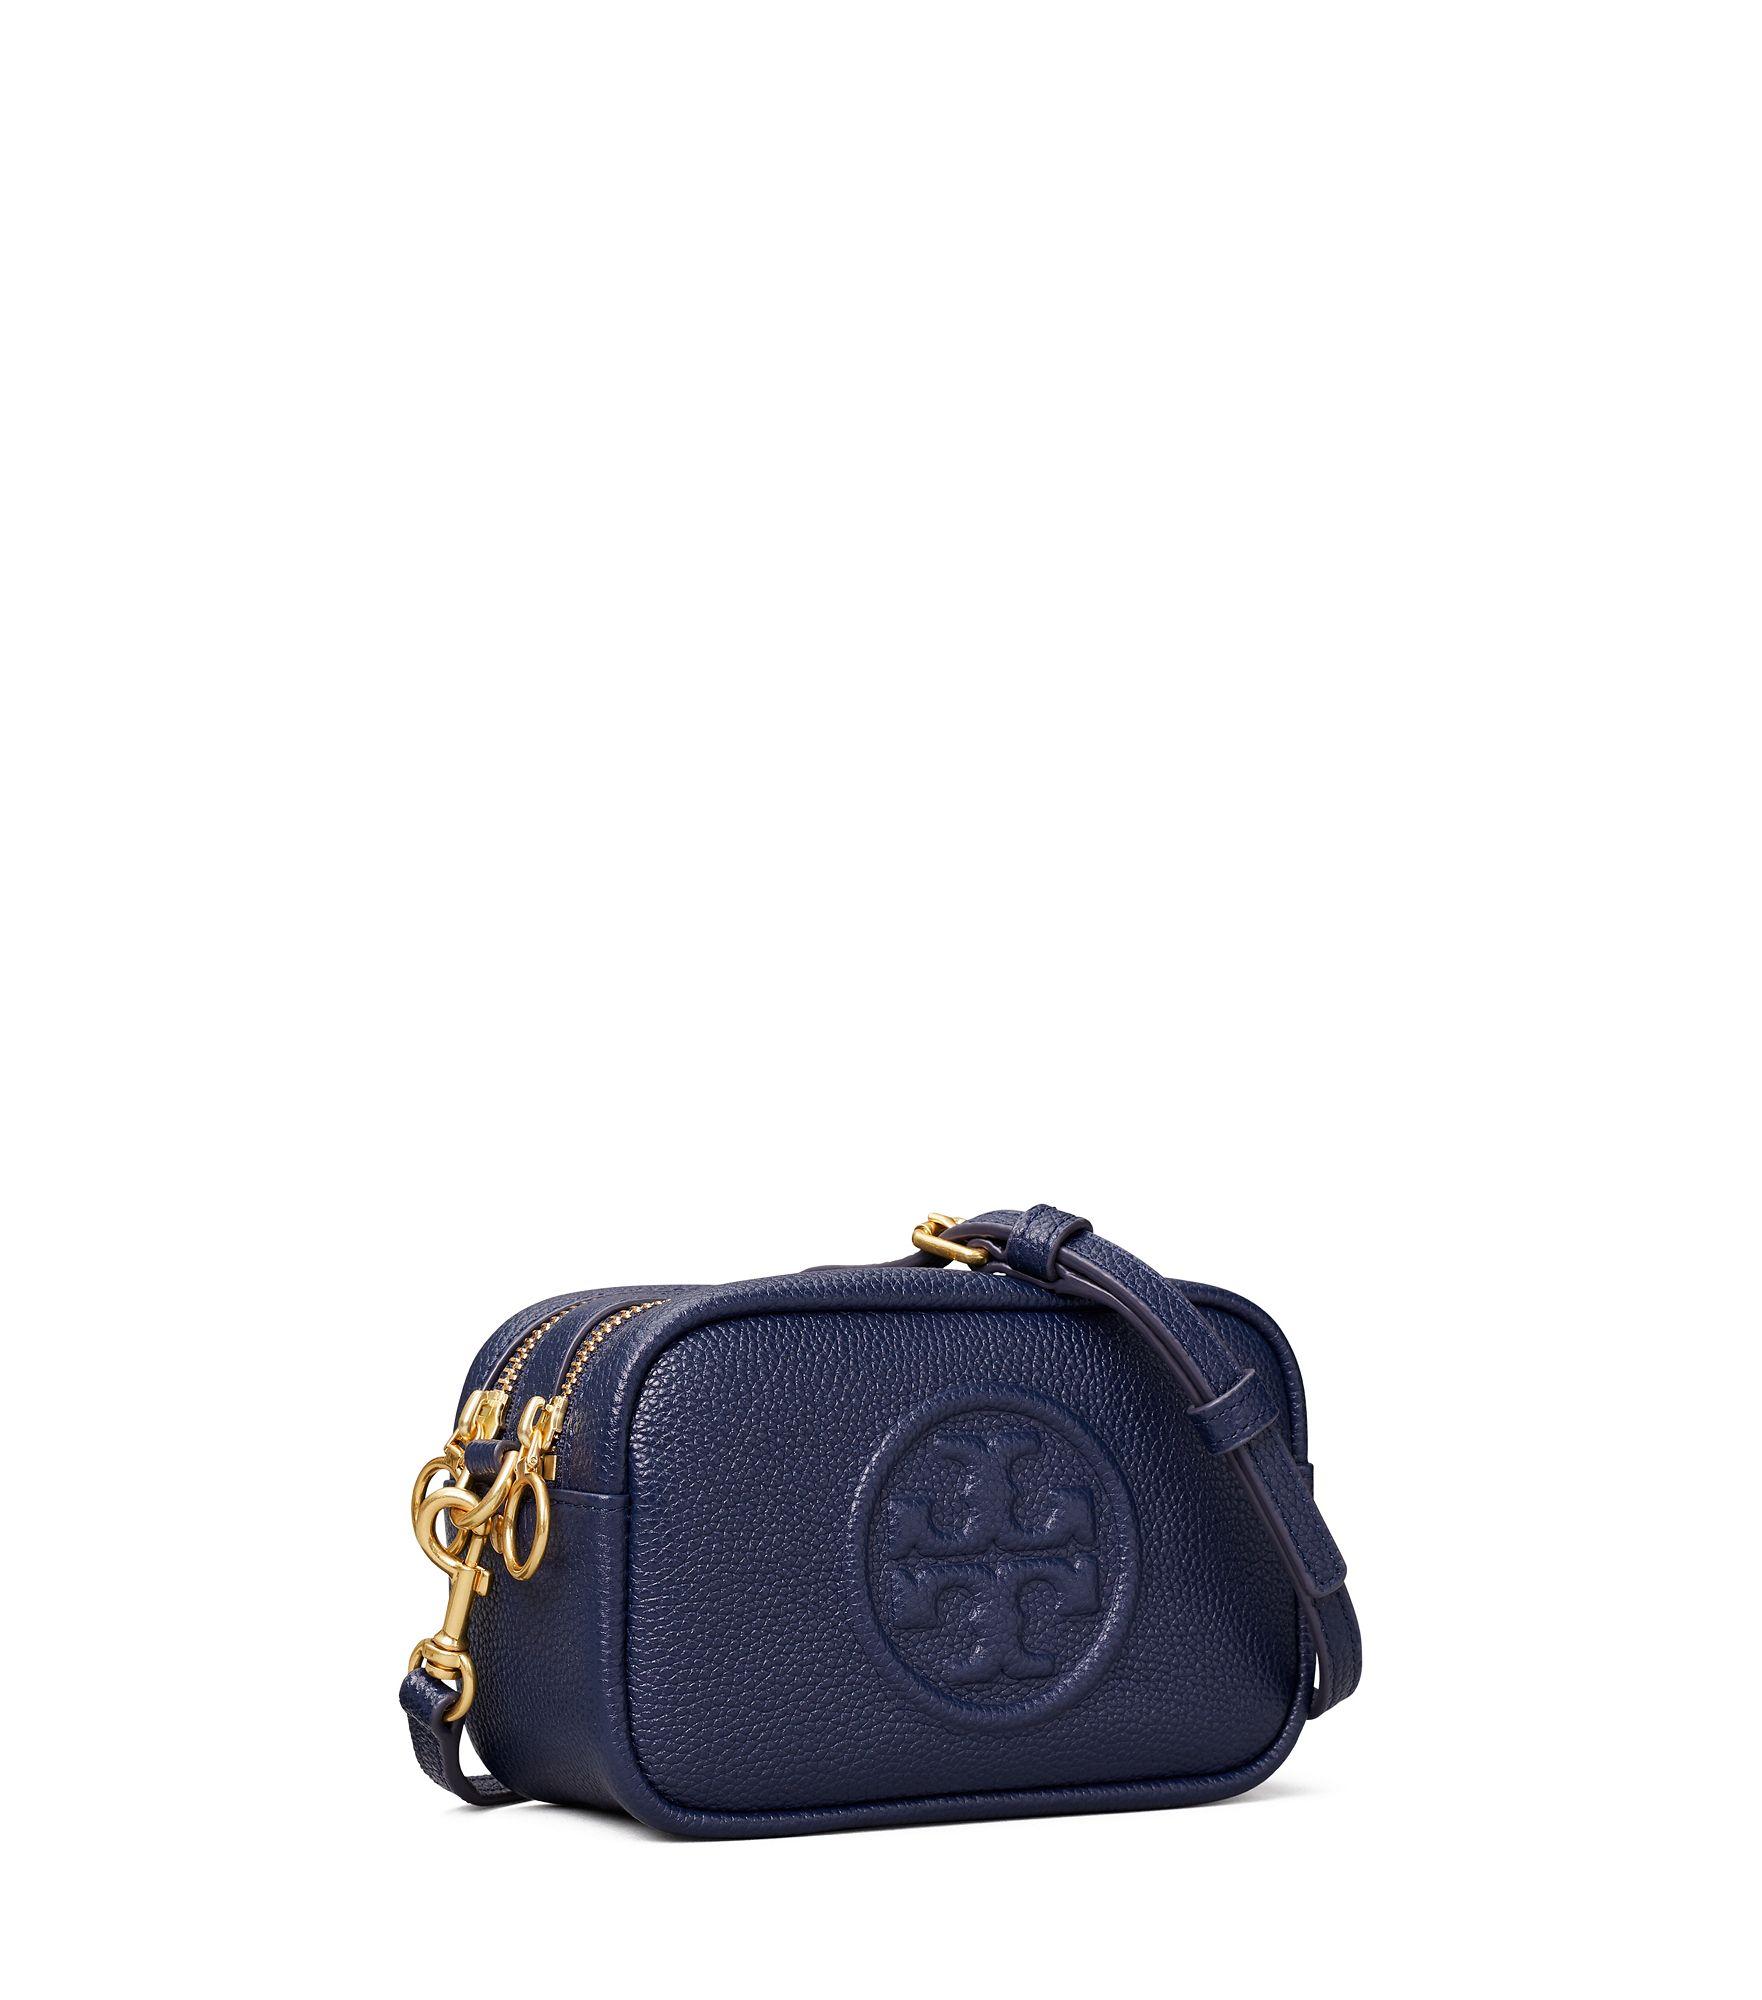 Tory Burch Perry Bombe Leather Crossbody Bag in Blue - Lyst